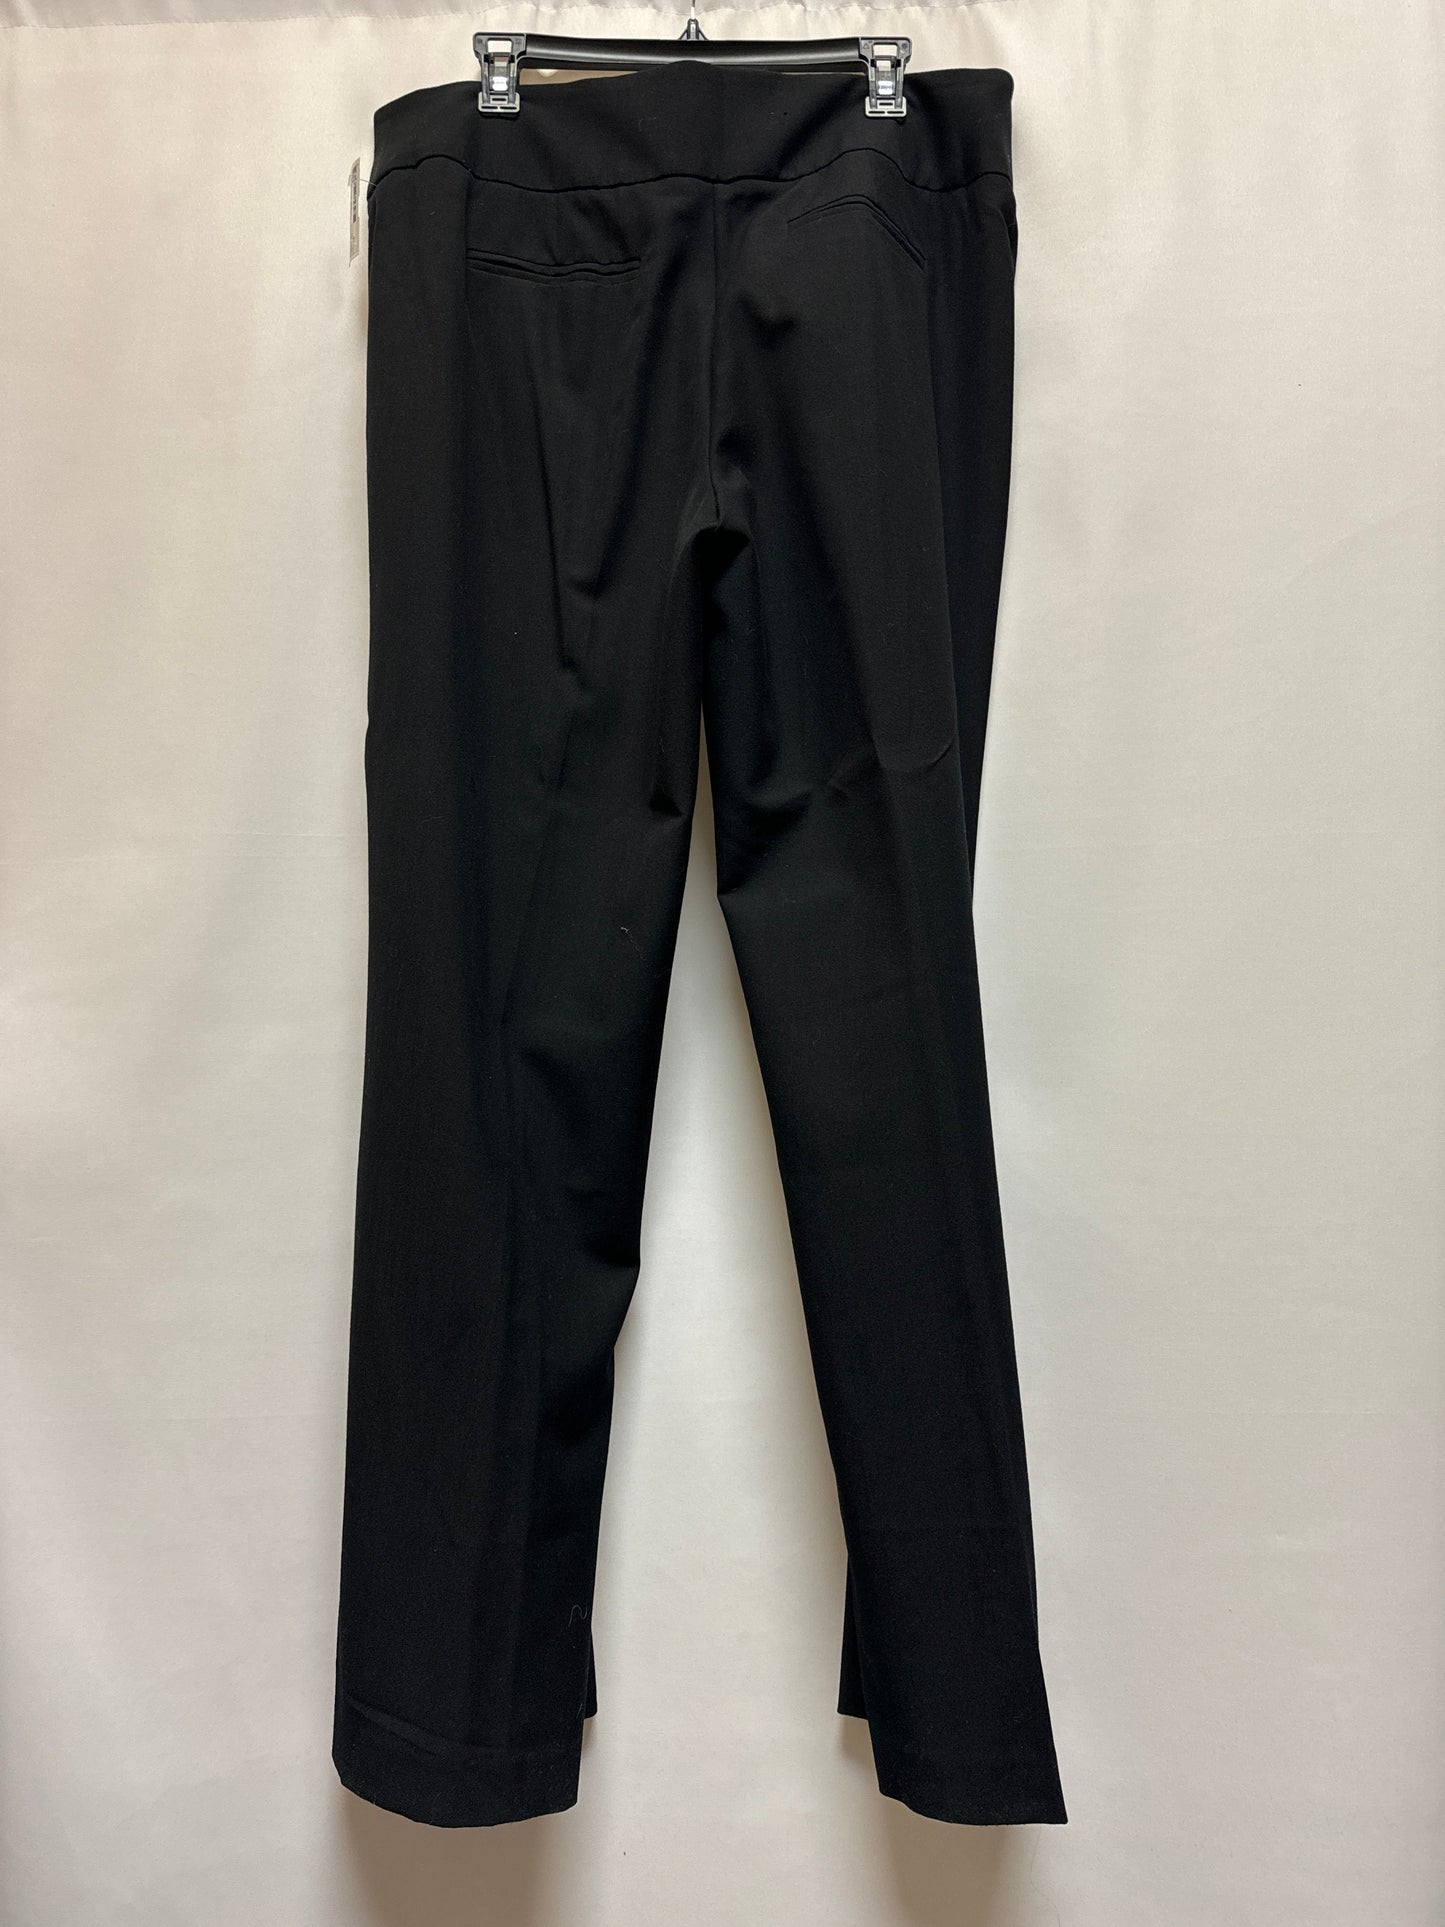 Pants Ankle By Style And Company  Size: 16